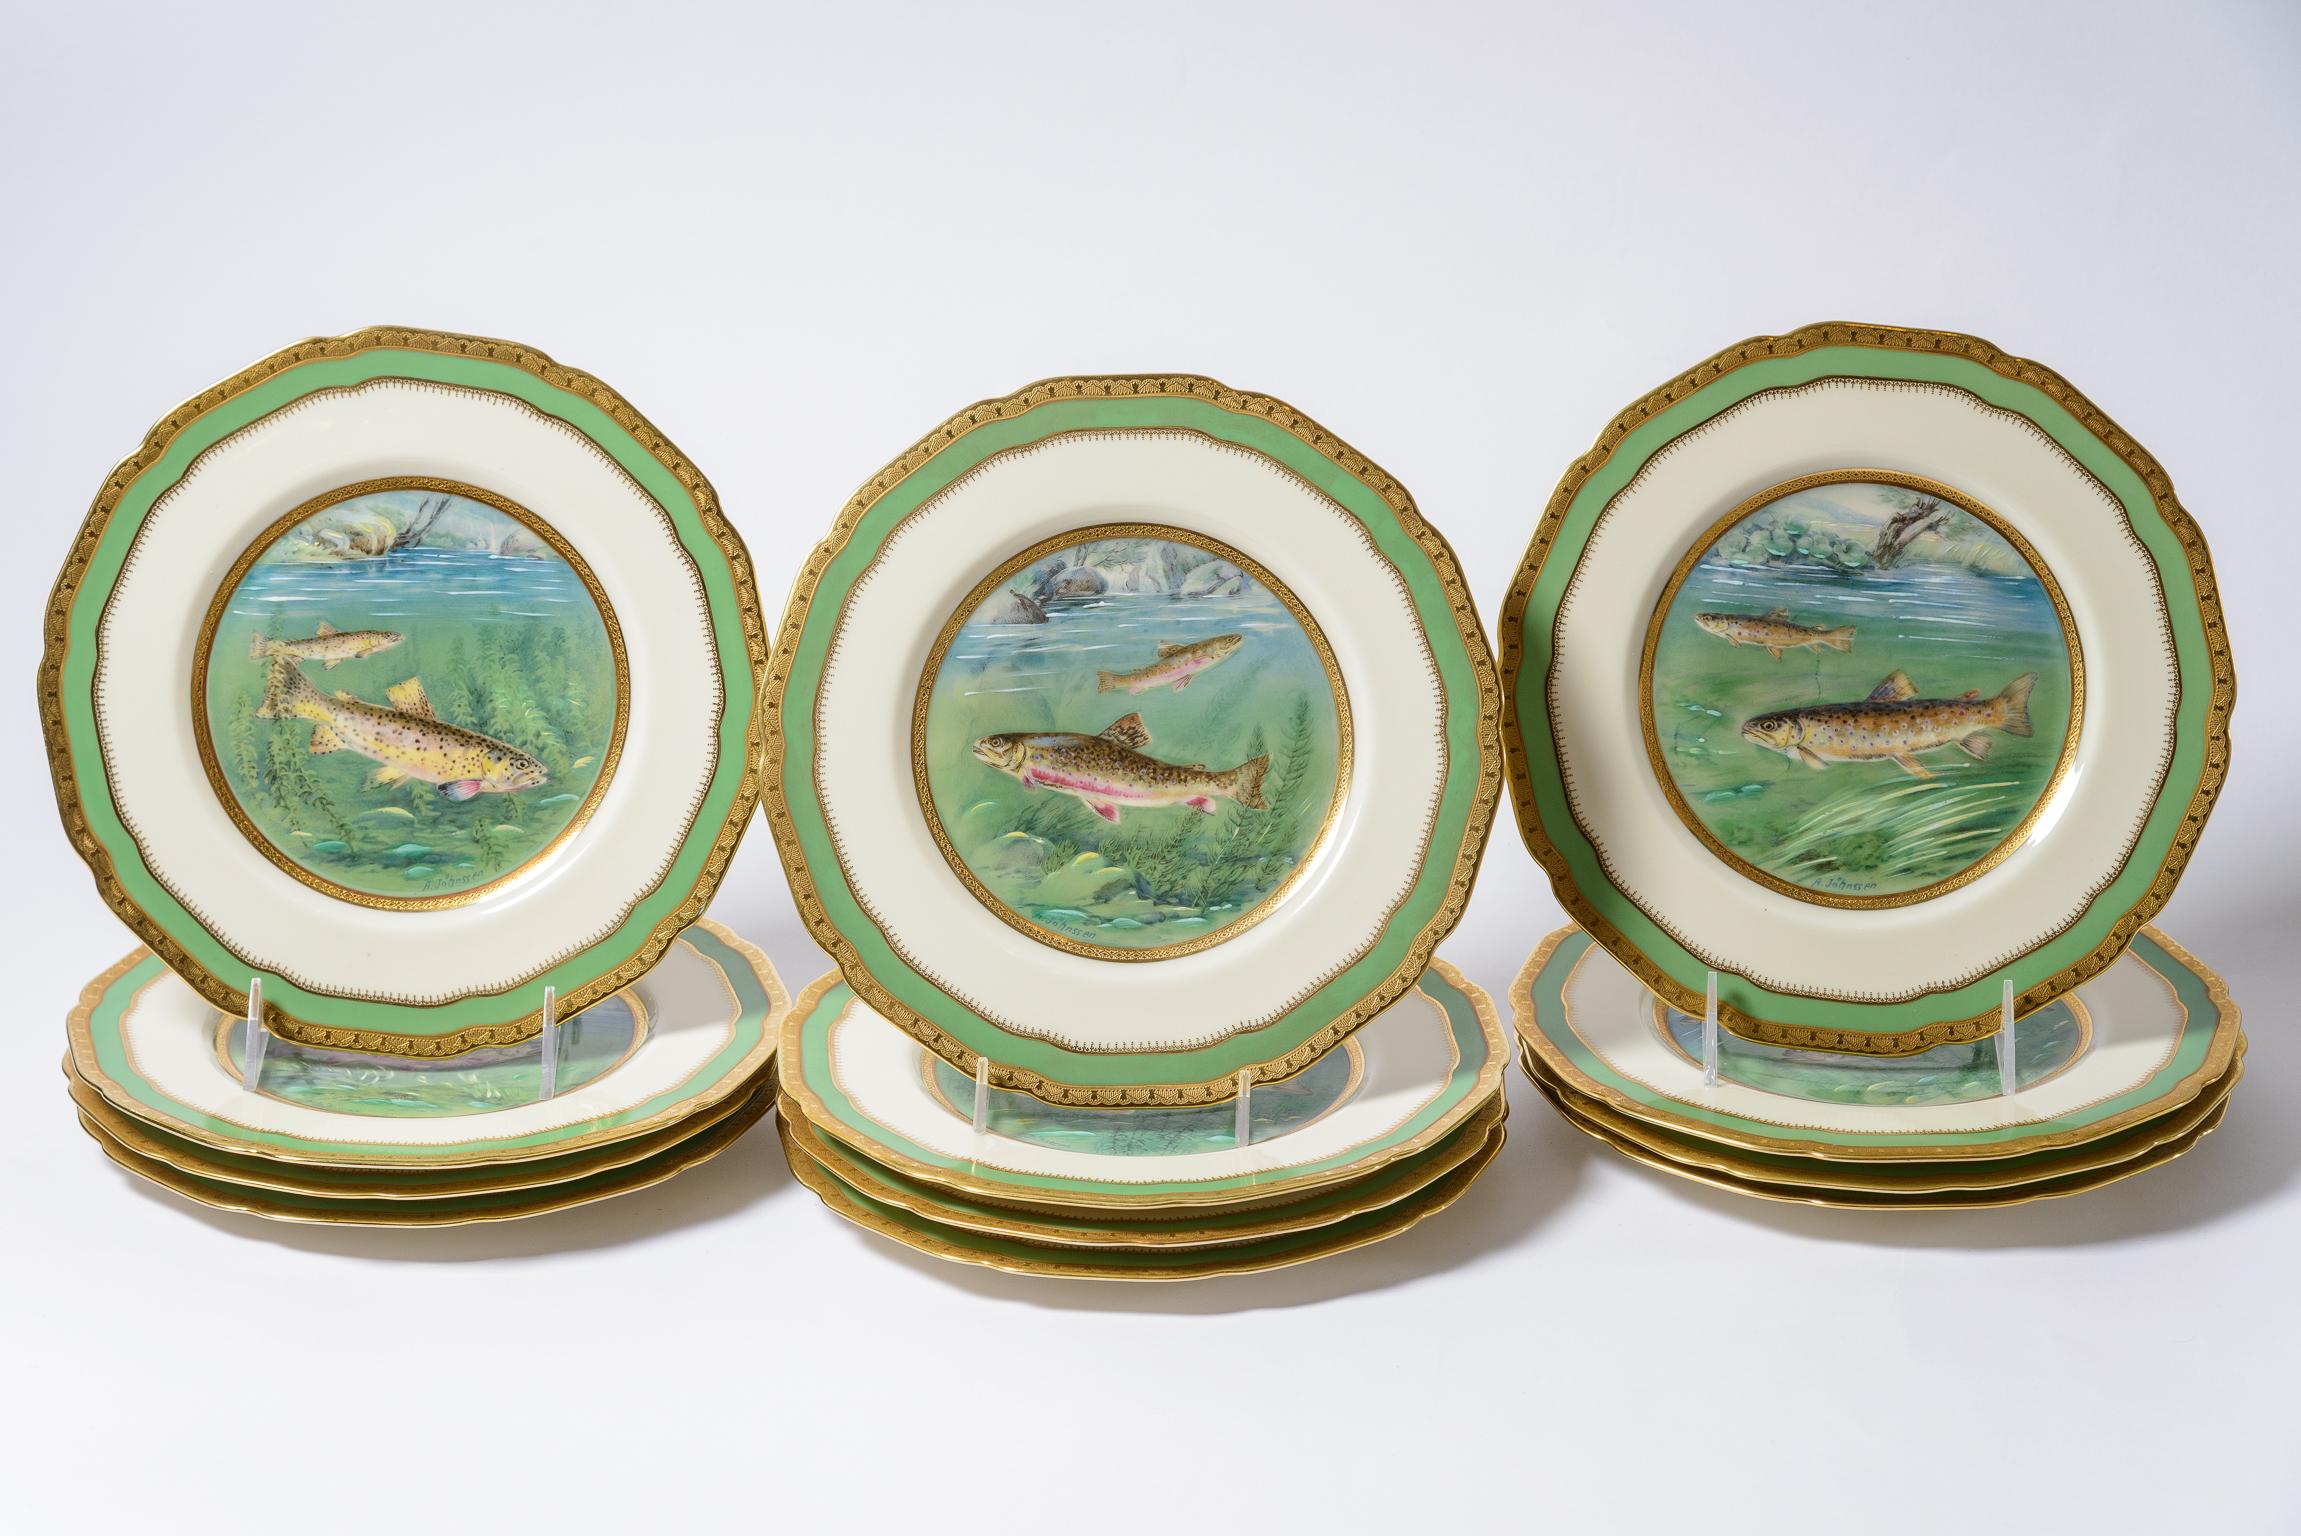 A highly decorated set of fish plates by the re known firm of Black Knight (by the Hutchenreuther Porcelain Factory). Known for their elaborate decorations and color, this set has a nice all over scalloped shape accented with a vibrant green band